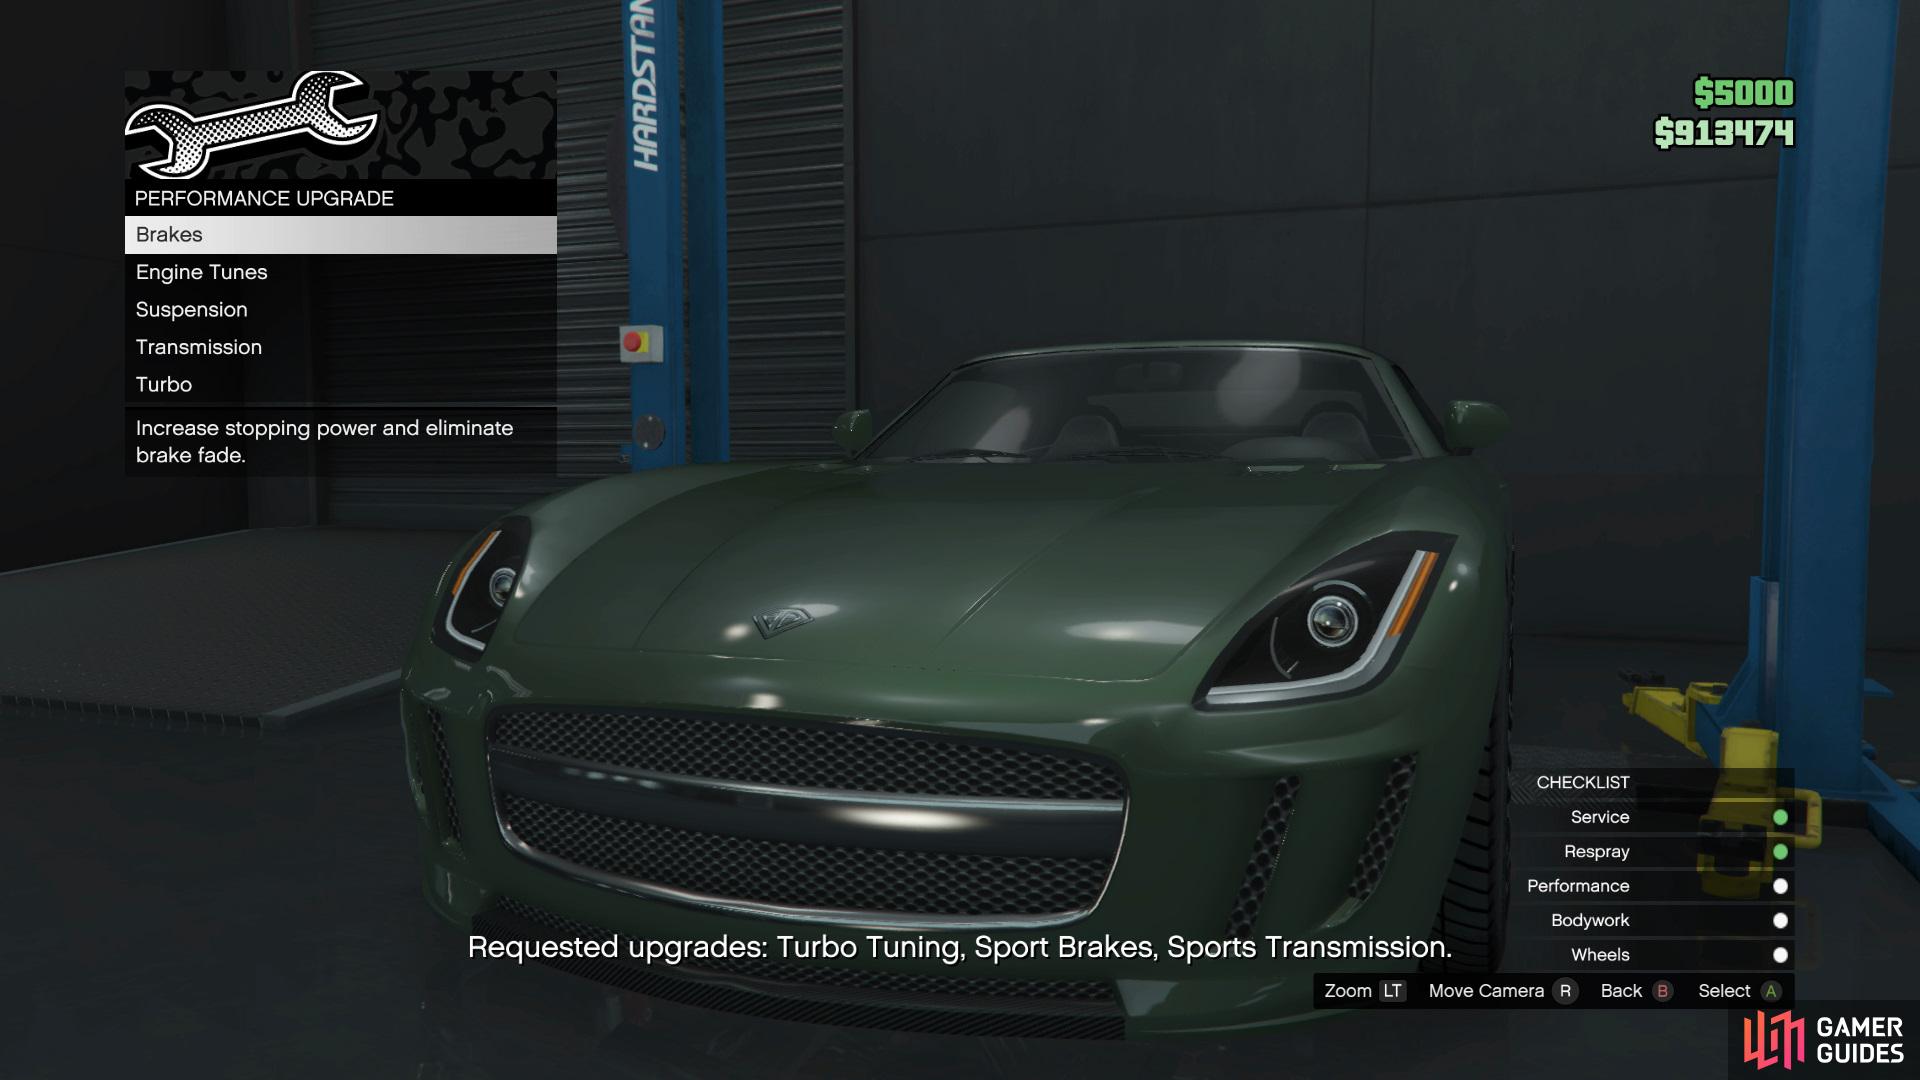 GTA Online' Los Santos Tuners: All 10 new cars and auto shops